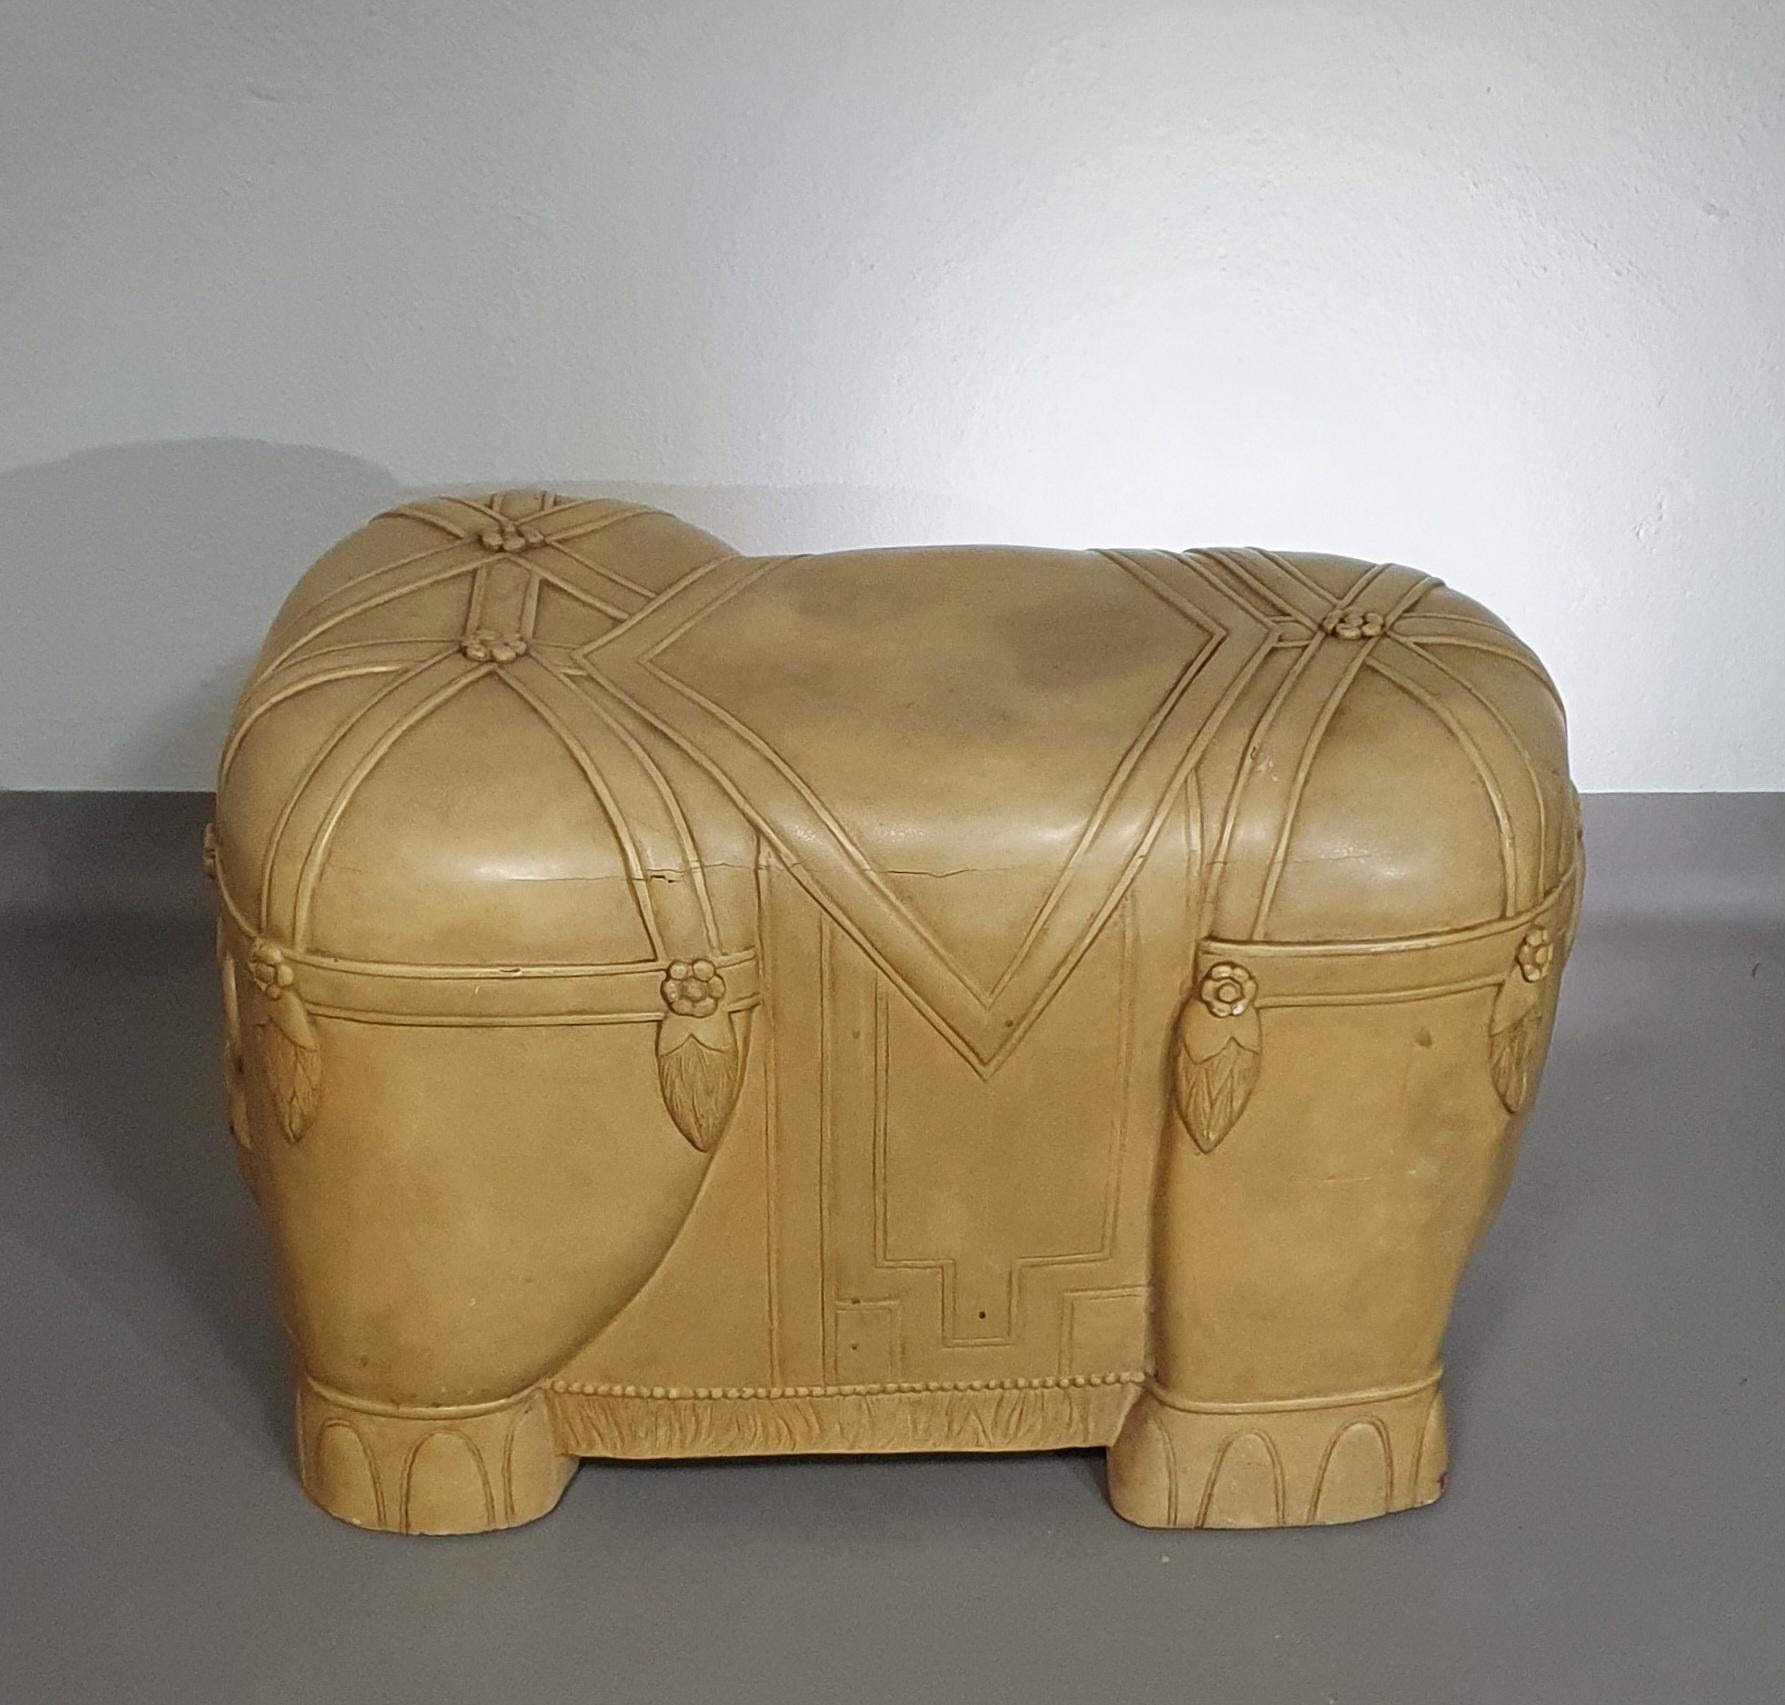 Decorative wood and resin elephant form table For Sale 11